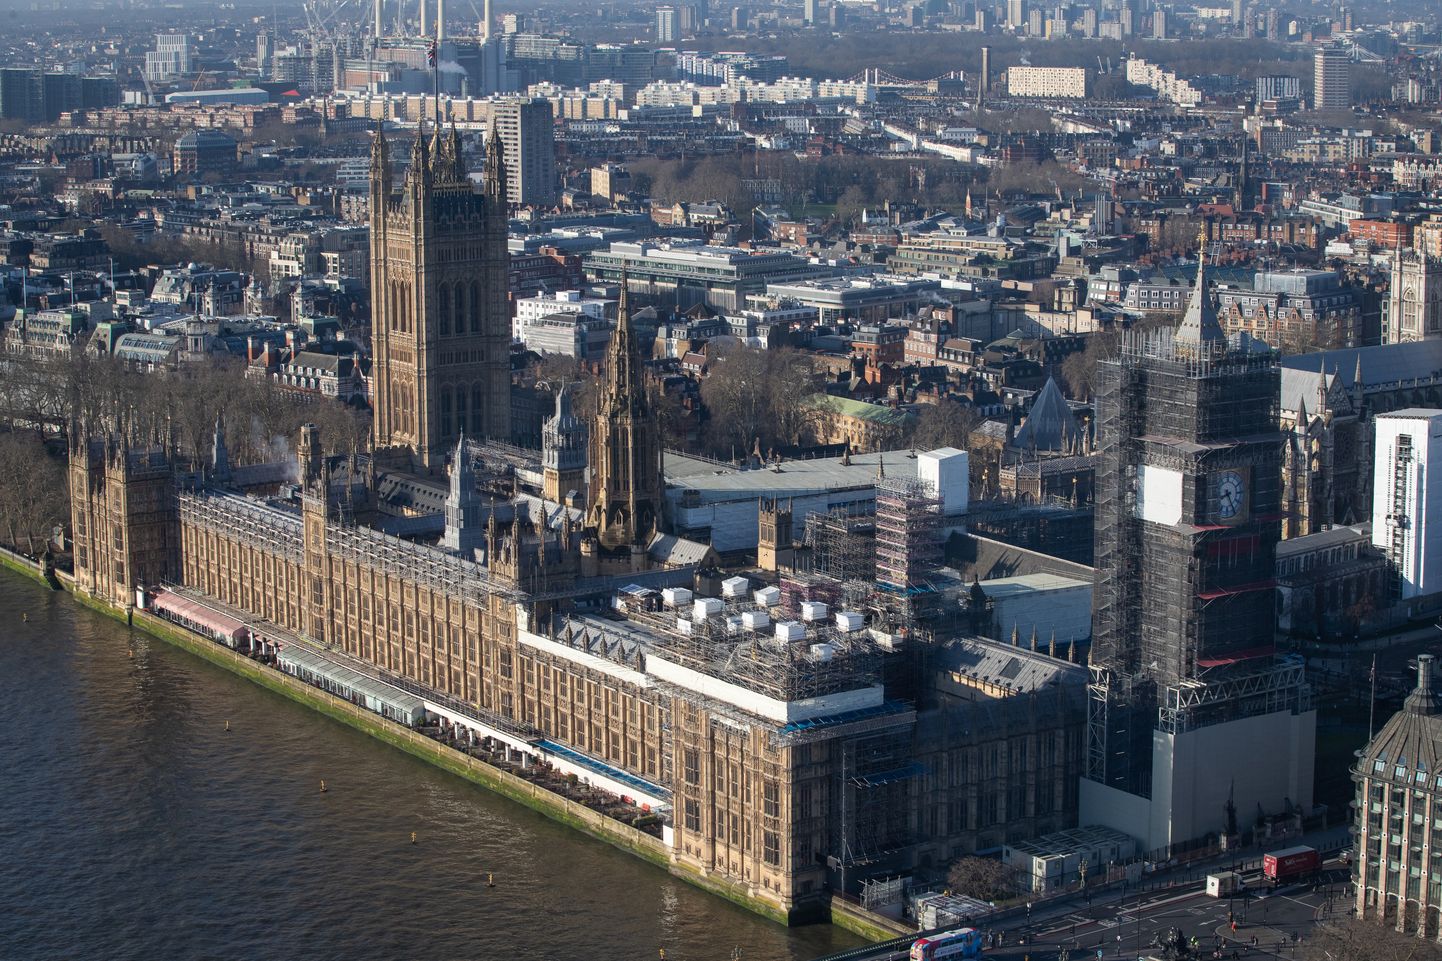 The Palace of Westminster in London is seen after sunrise.